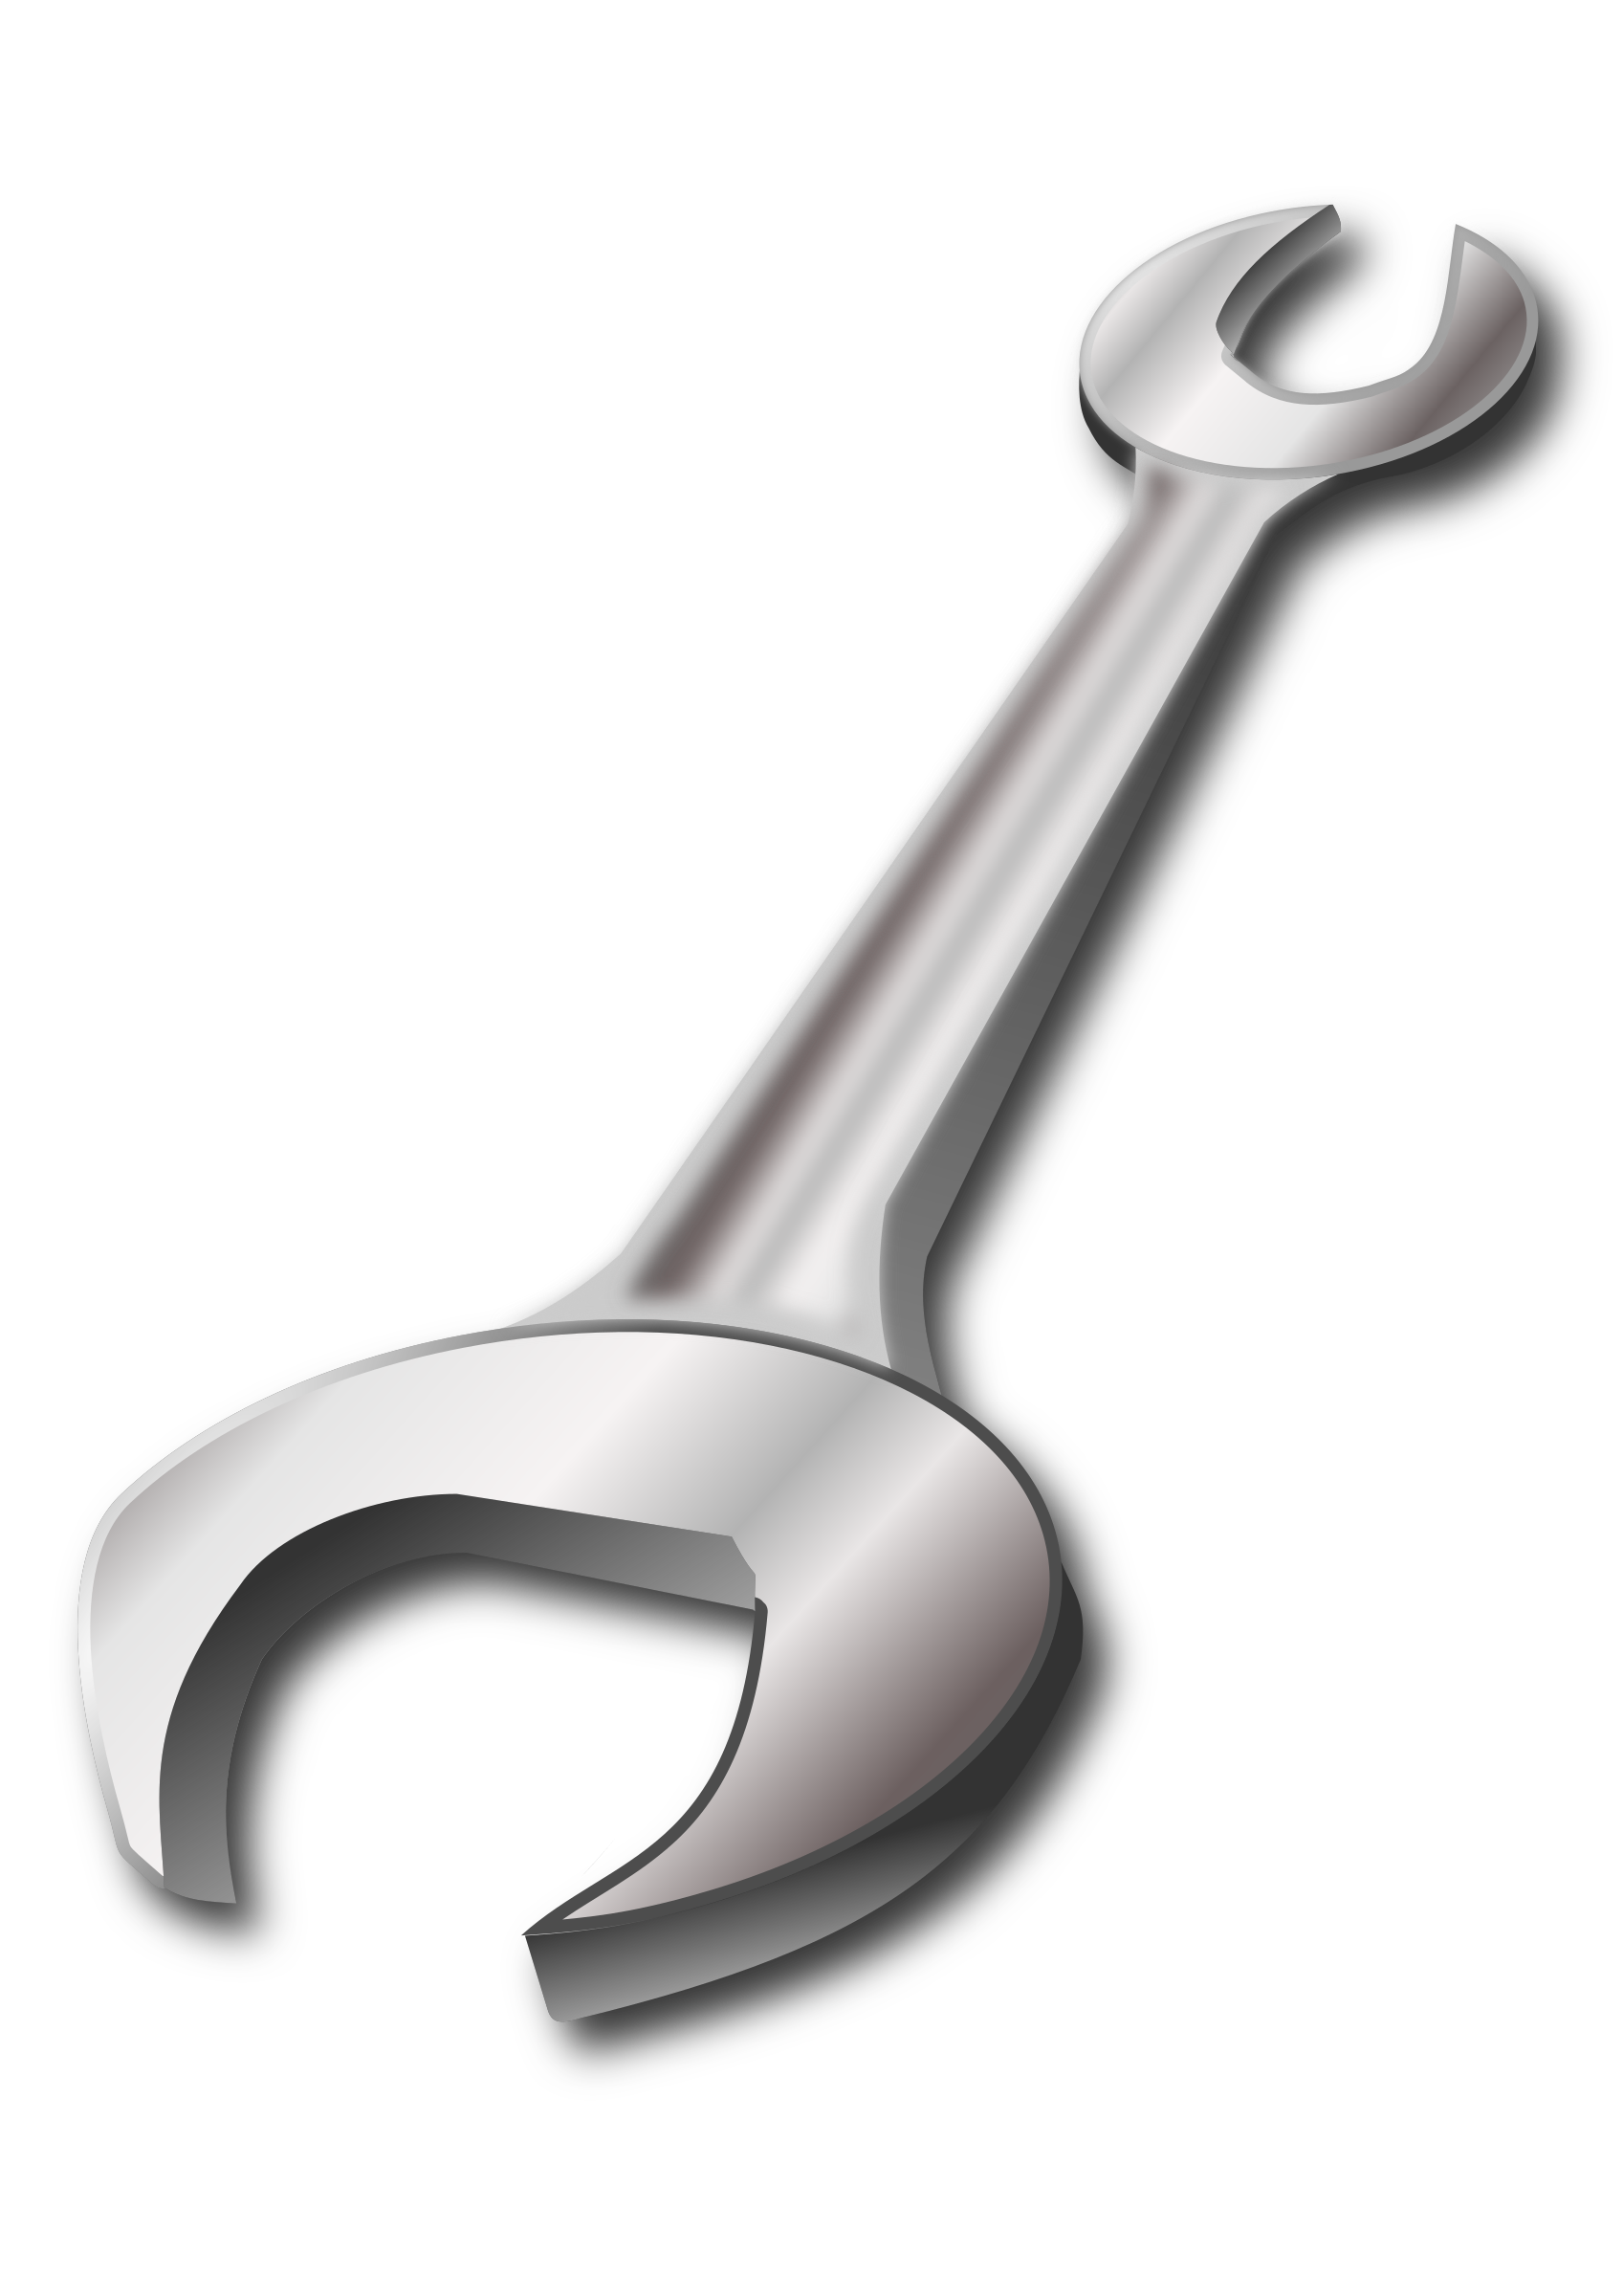 Big image png. Hand clipart wrench